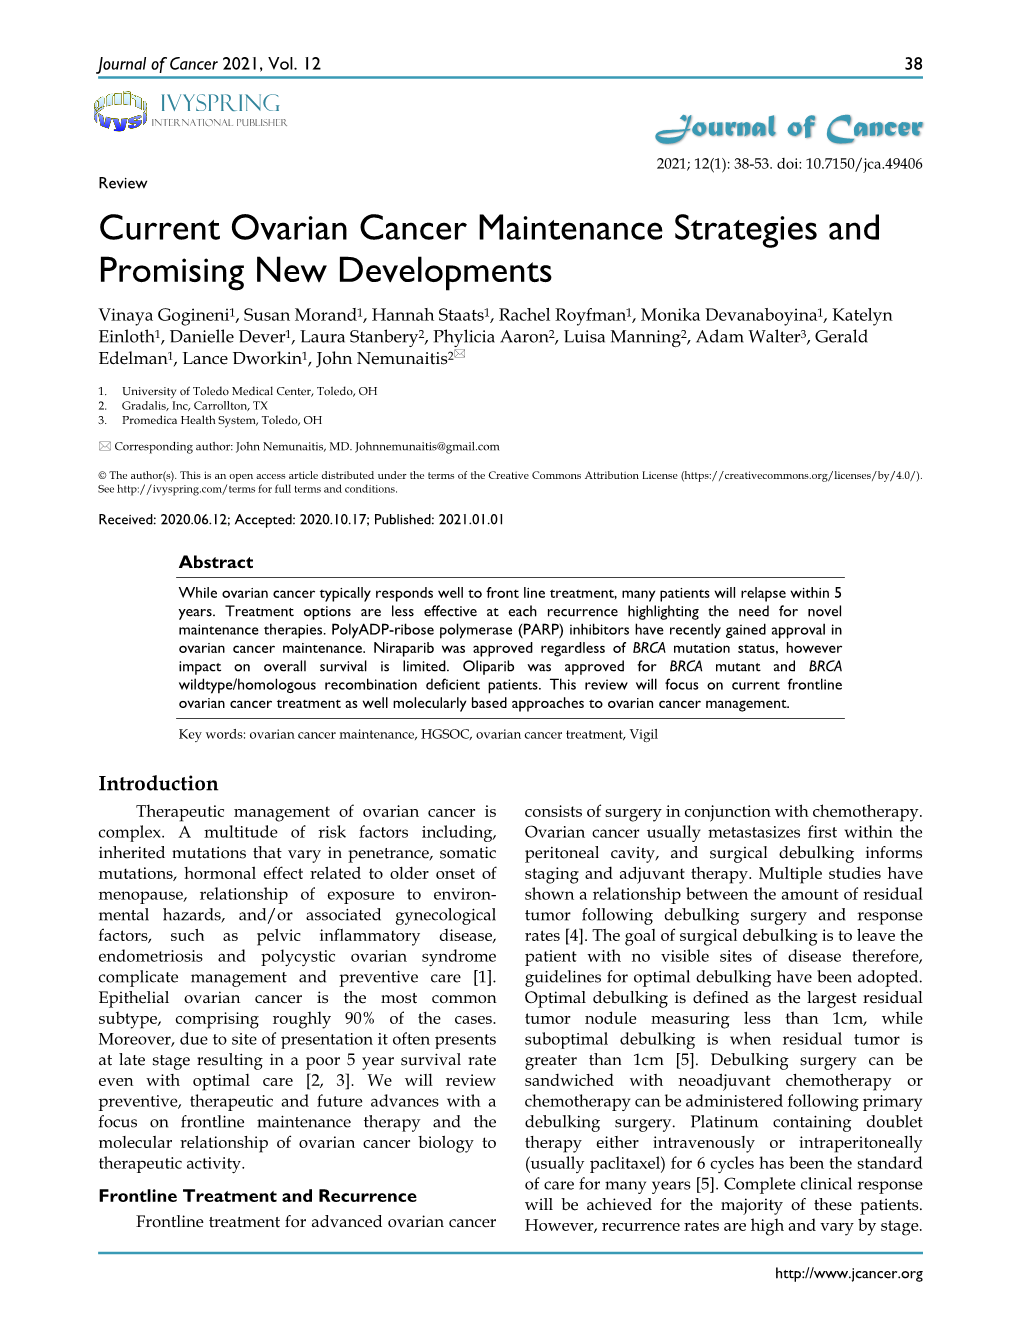 Current Ovarian Cancer Maintenance Strategies and Promising New